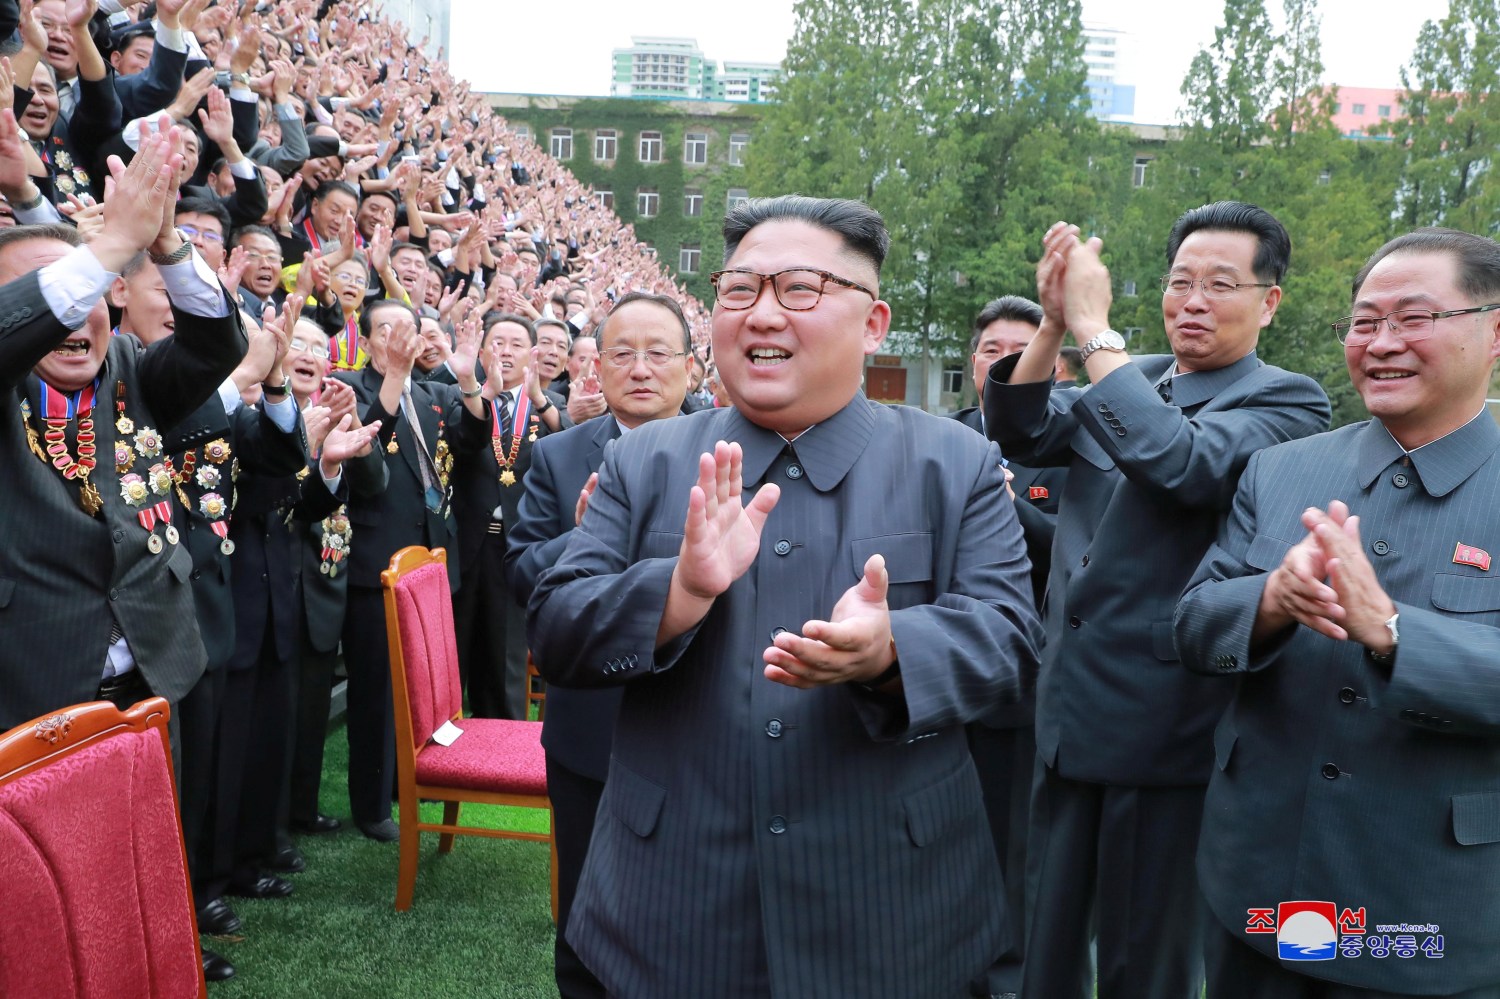 North Korean leader Kim Jong Un attends a photo session with teachers and researchers of Kim Chaek University of Technology in Pyongyang during a ceremony marking the 70th founding anniversary of the university, in this photo released by North Korea's Korean Central News Agency (KCNA) on September 29, 2018.    KCNA via REUTERS ATTENTION EDITORS - THIS IMAGE WAS PROVIDED BY A THIRD PARTY. REUTERS IS UNABLE TO INDEPENDENTLY VERIFY THIS IMAGE. NO THIRD PARTY SALES. SOUTH KOREA OUT. - RC1839E03400